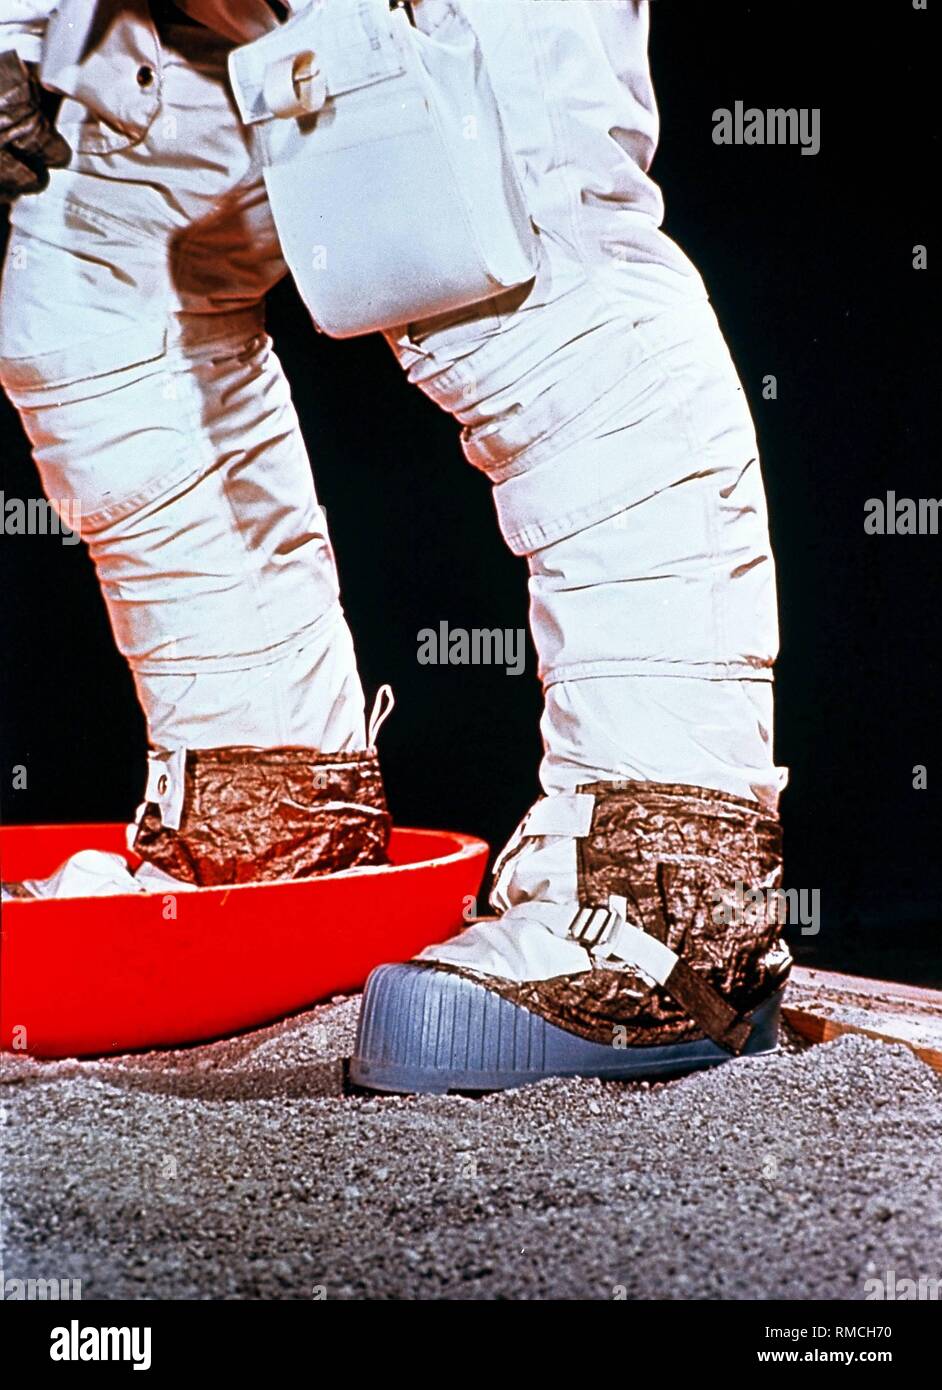 How Exactly Did Moon Boots Go From A Space Age Experiment To The A-list's  Go-To Shoe?